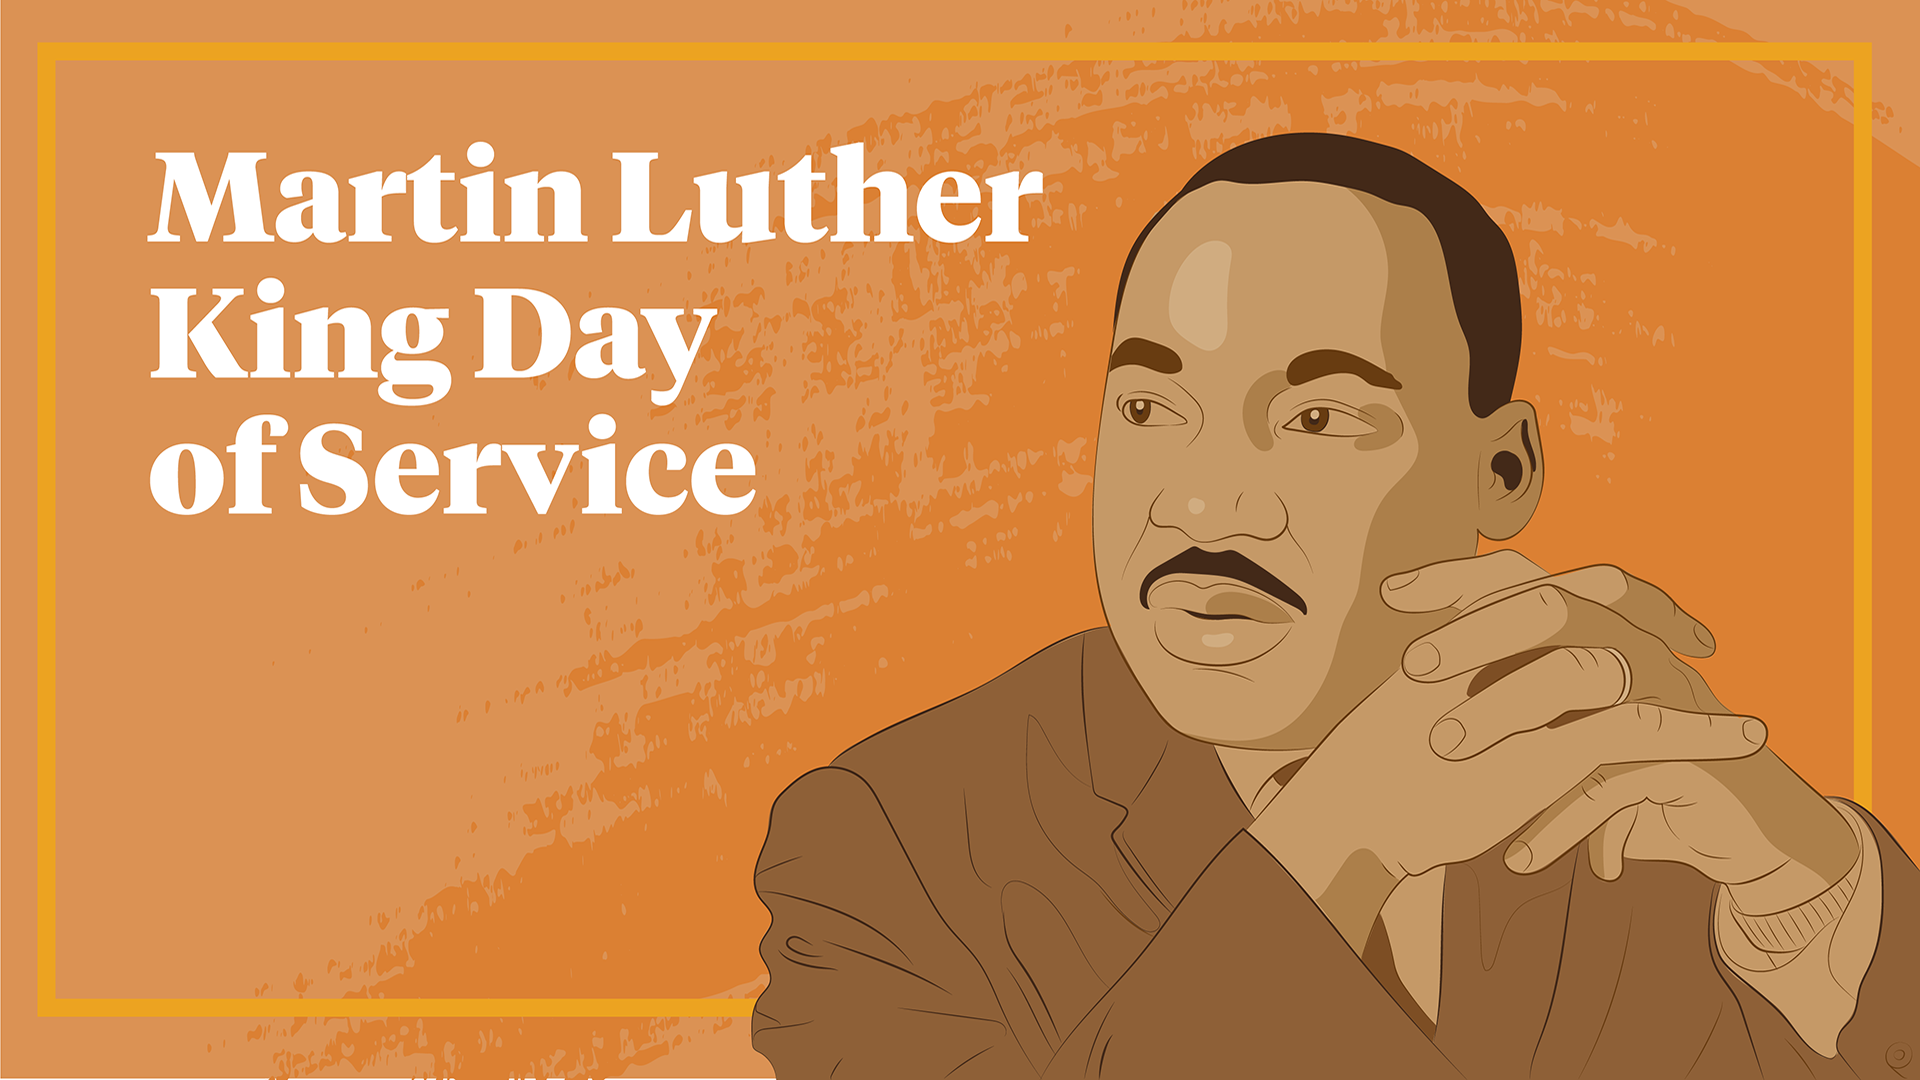 How to Honor Martin Luther King's Legacy this Year